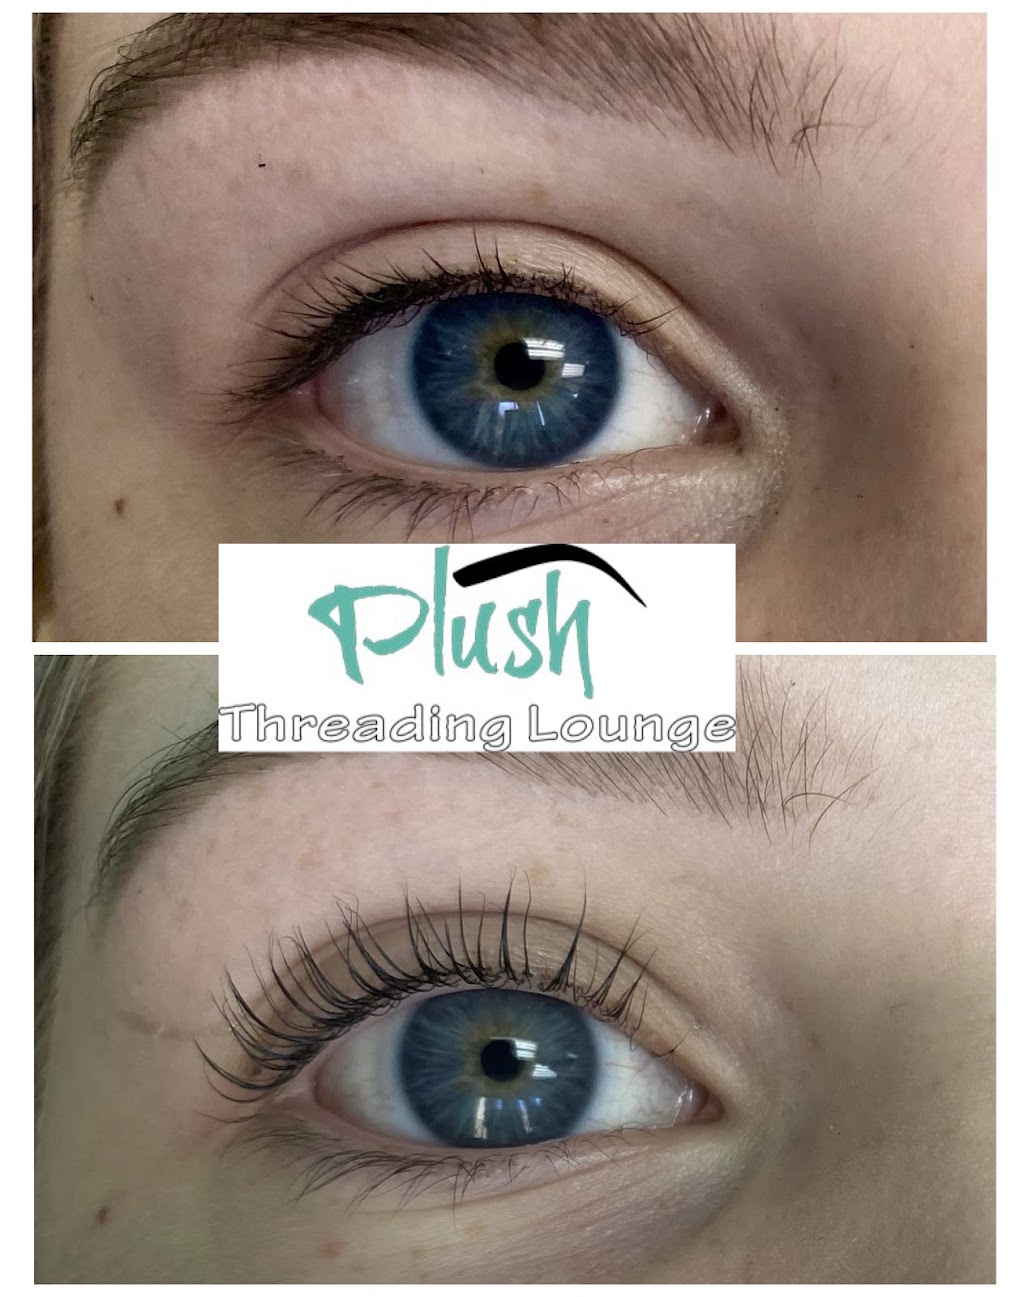 Plush Threading Lounge | 15853 N Fwy Inside Tanger outlets, #150, Fort Worth, TX 76177 | Phone: (817) 204-0040